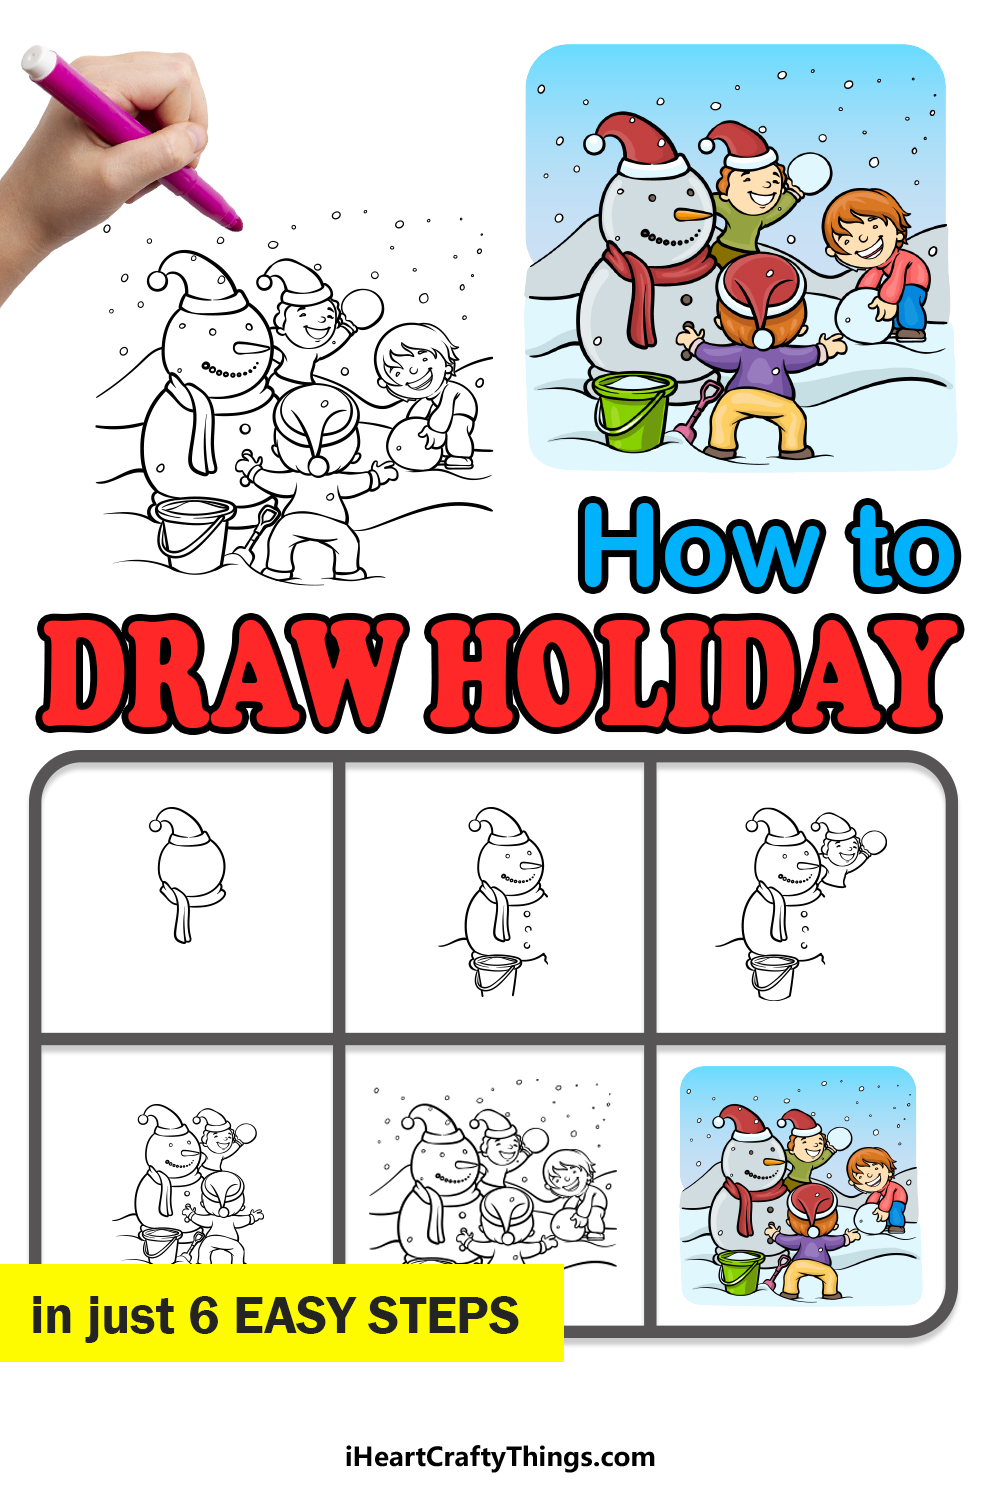 how to draw a Holiday in 6 easy steps